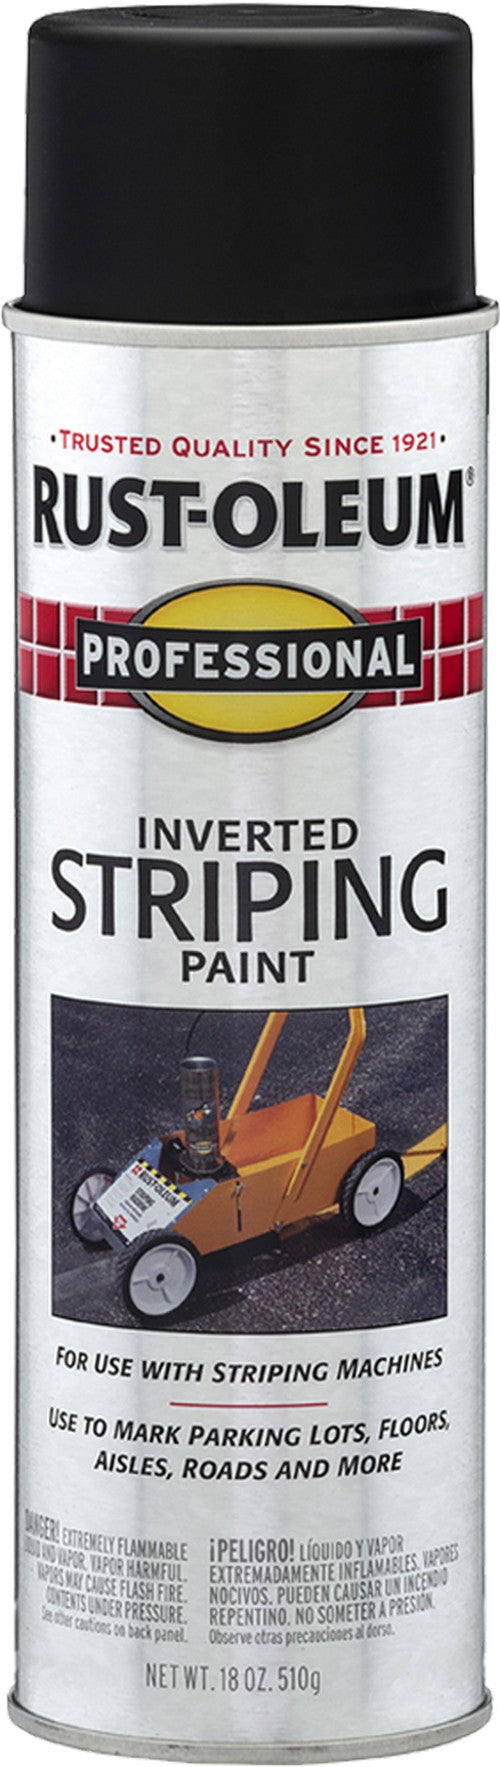 High Performance - V2300 System Inverted Marking Paint